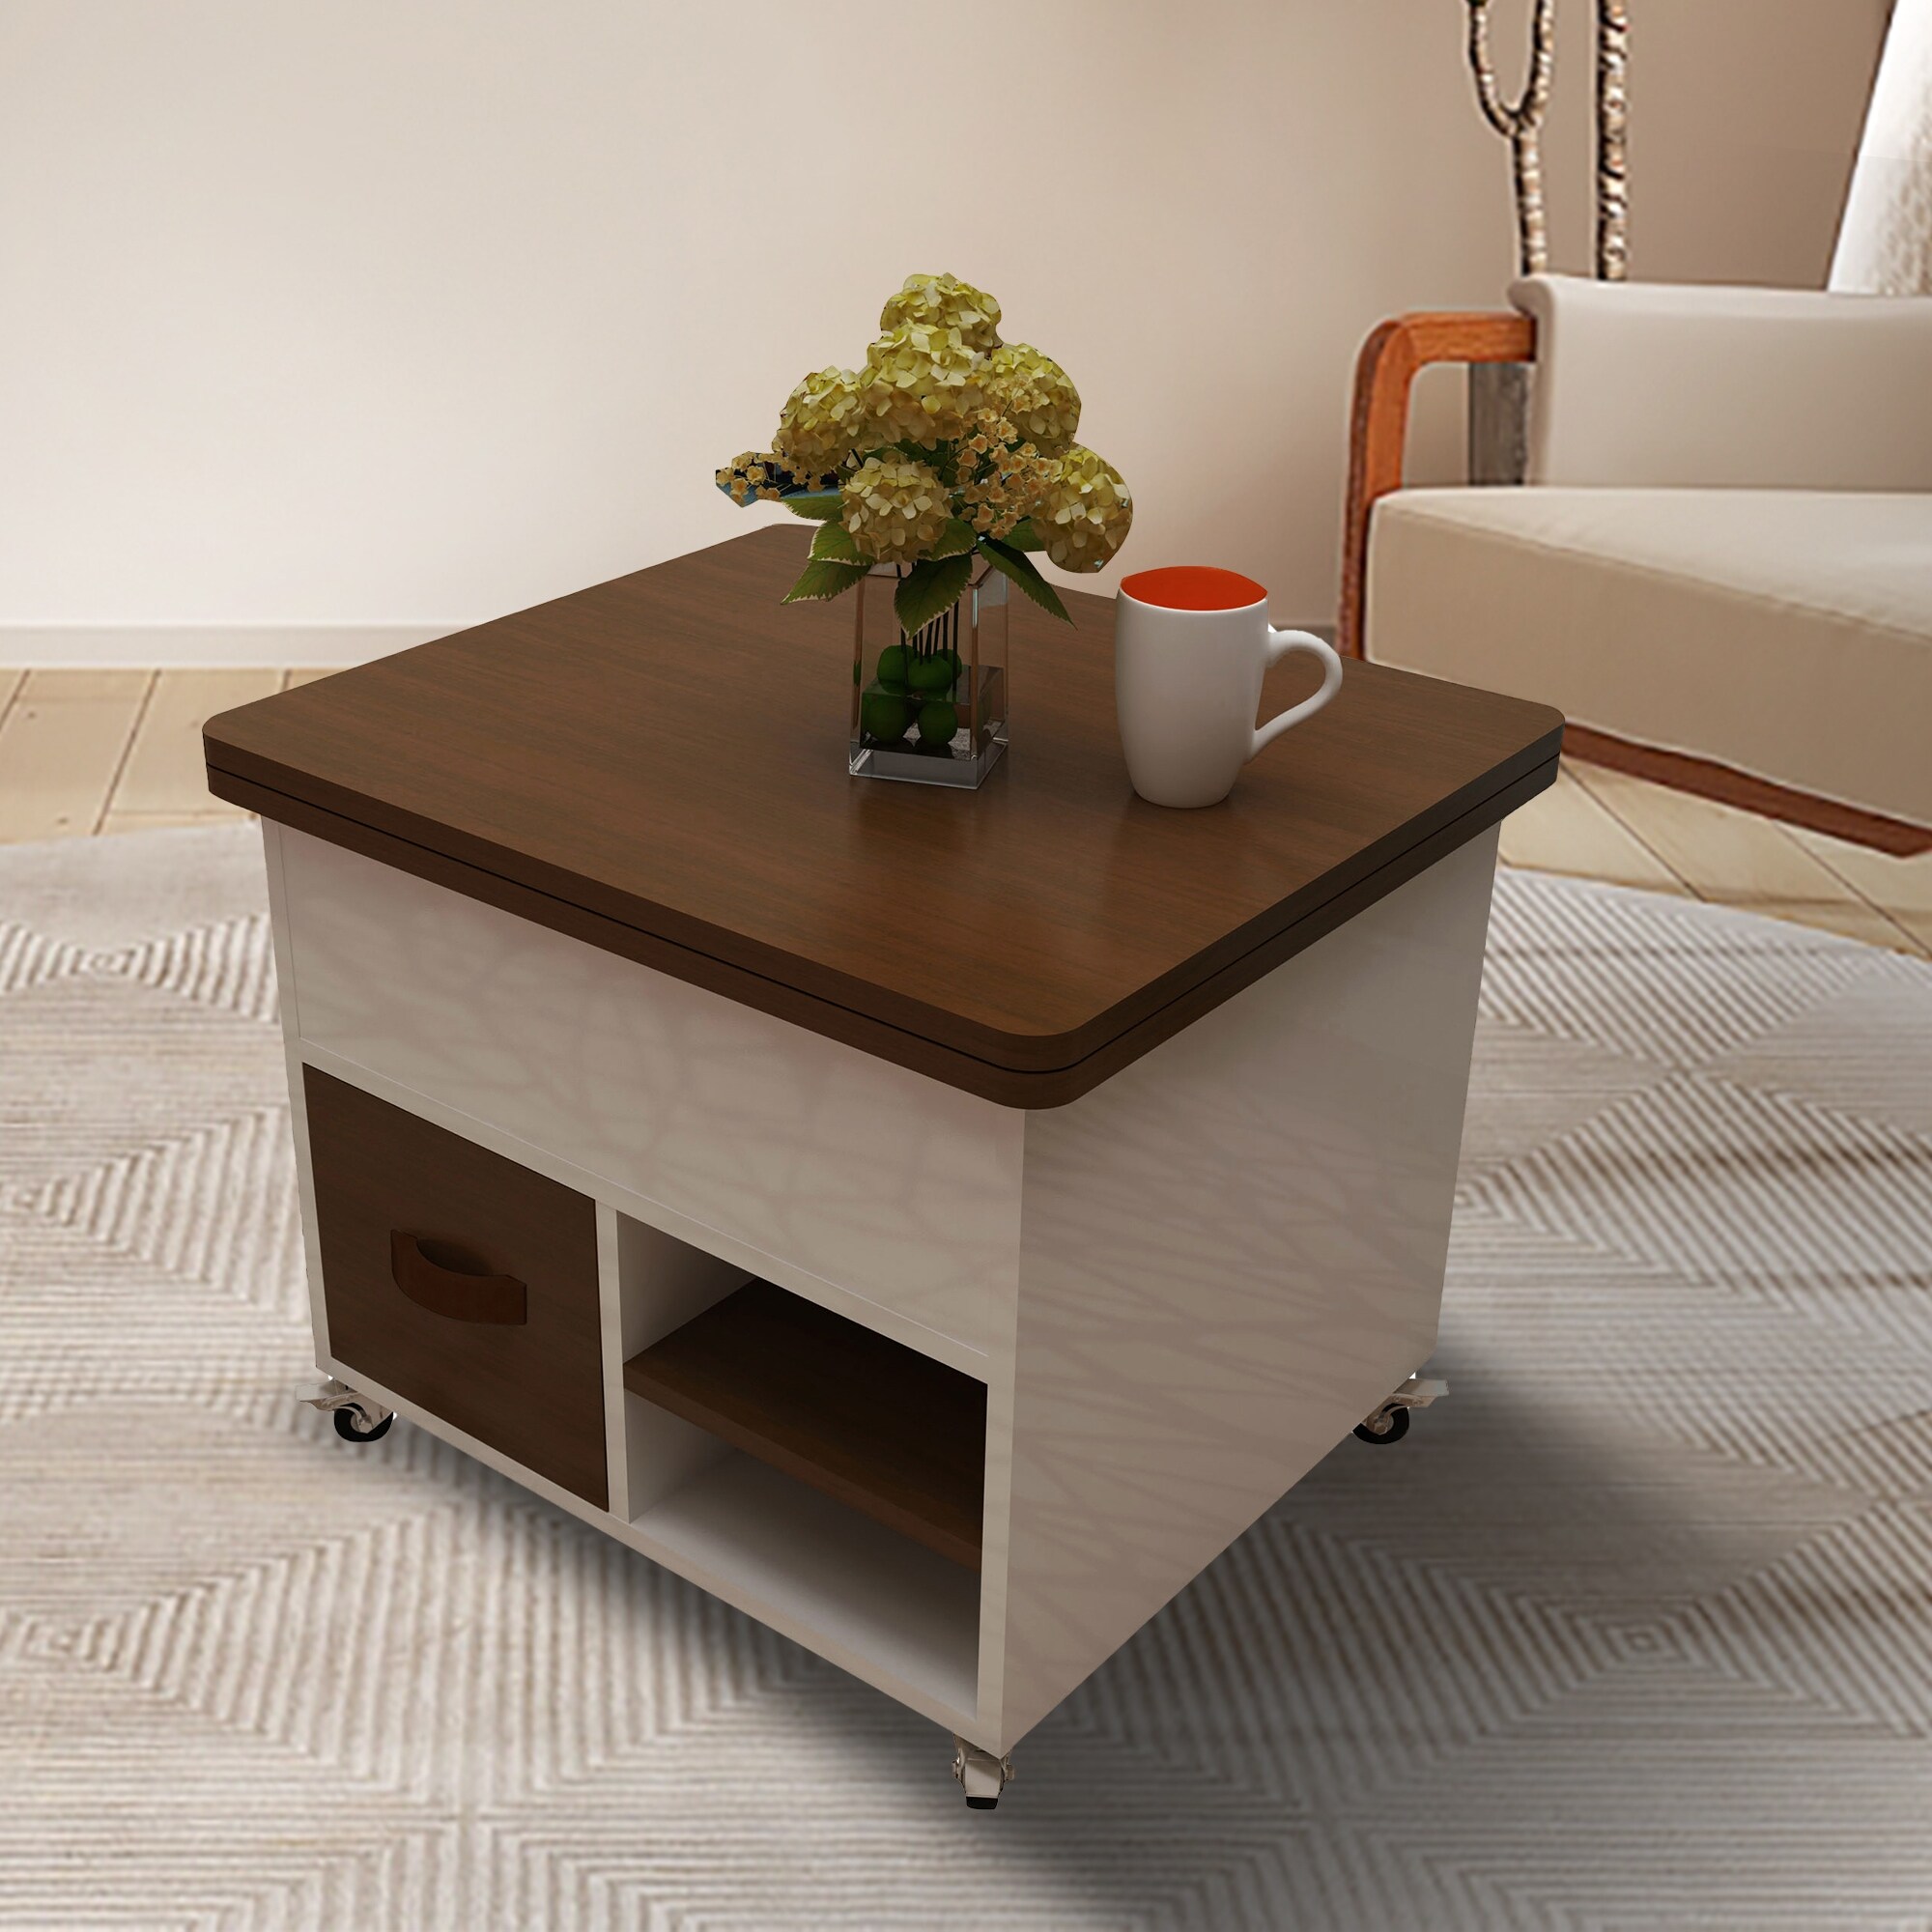 JASIWAY Modern Lift Top Coffee Table with Storage